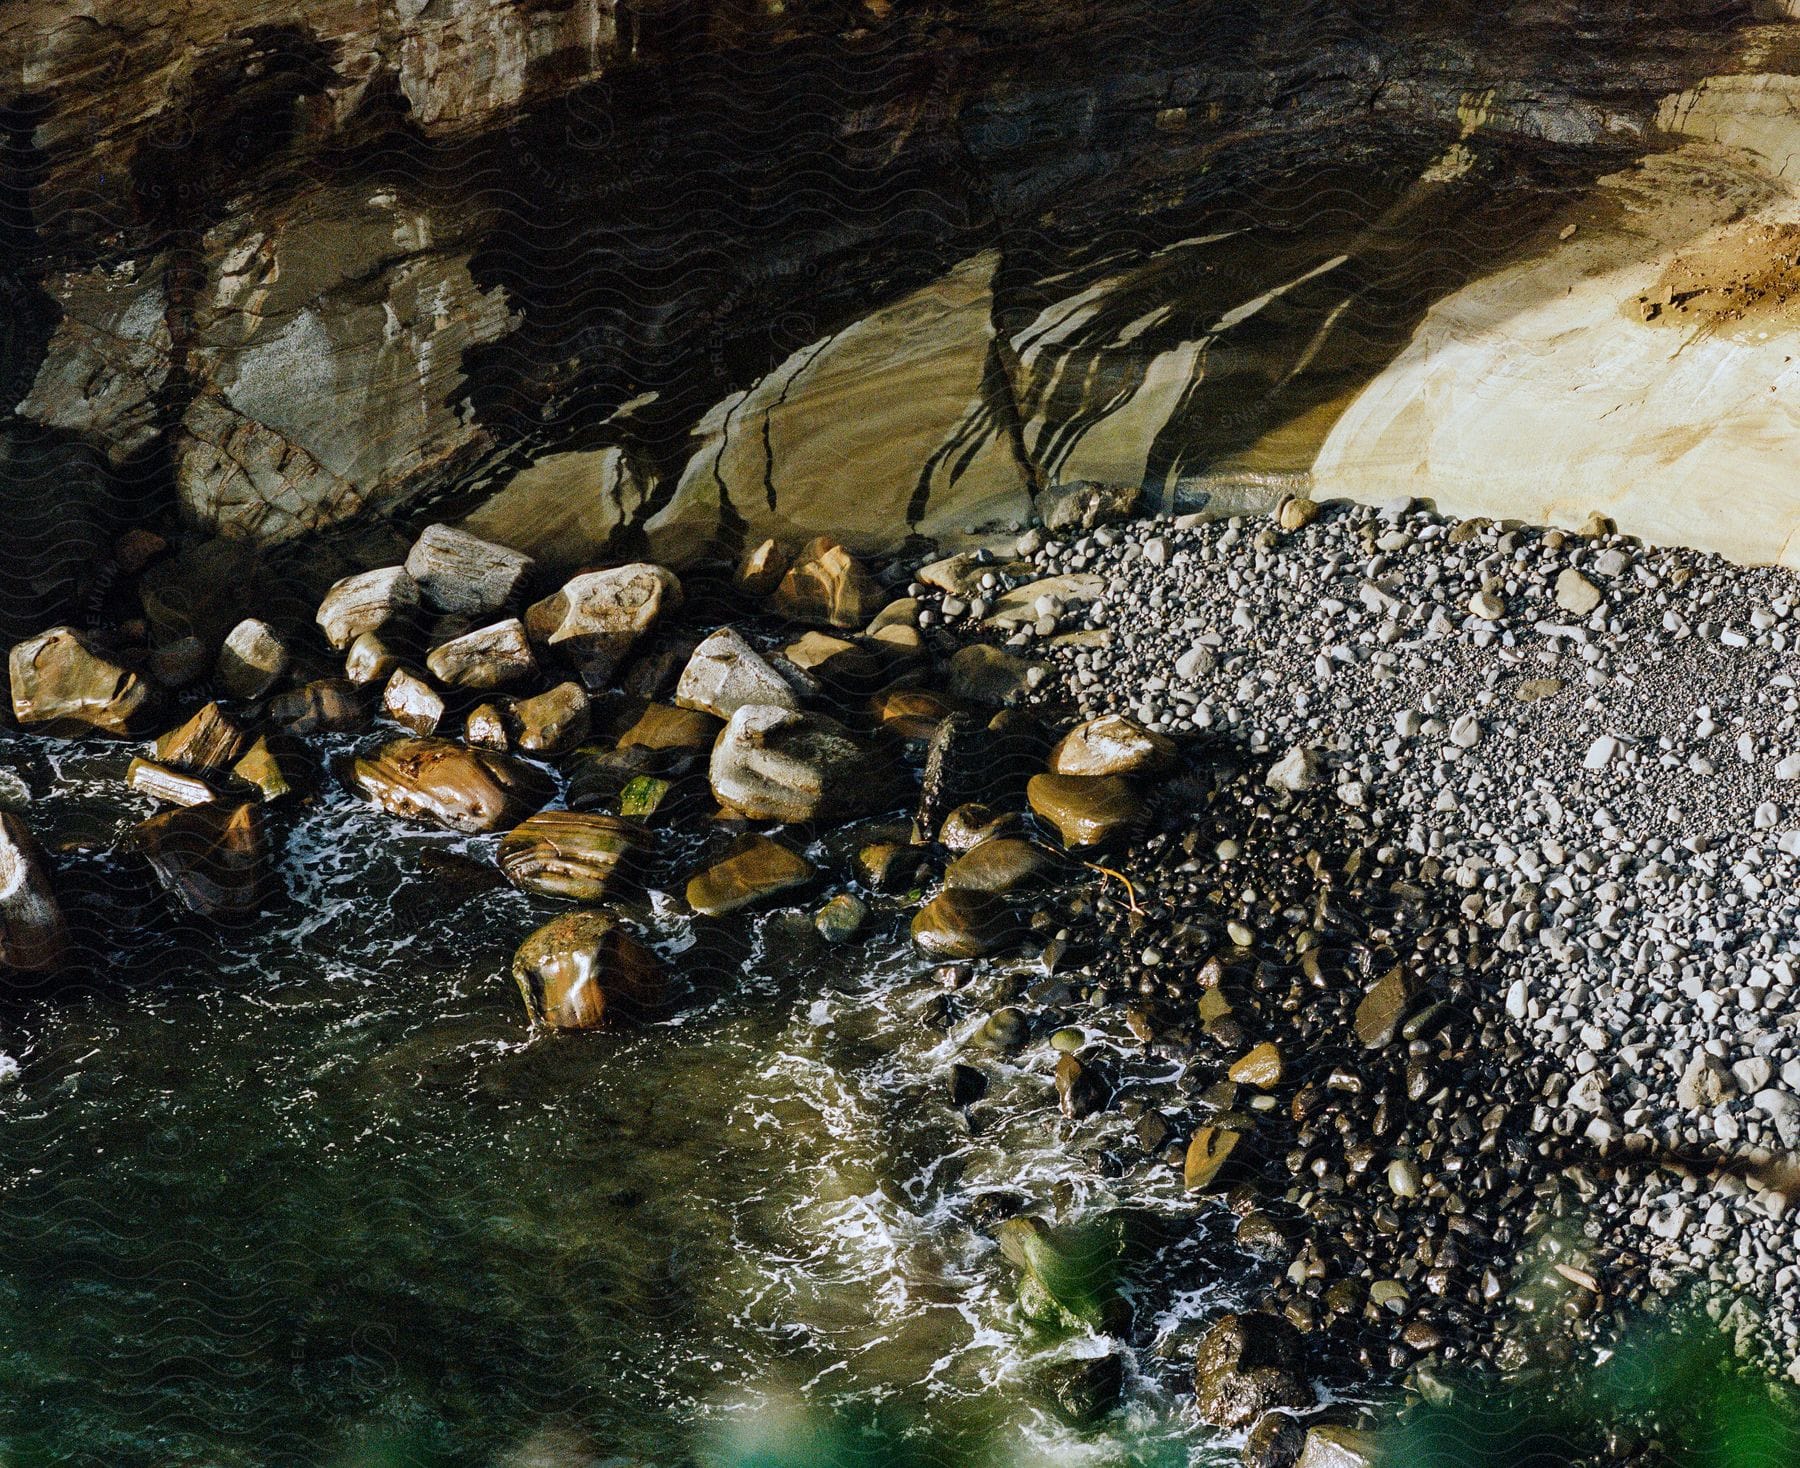 Rocky shoreline of a creek with large boulders and pebbles next to the water, with shadows cast on the rocks and water.